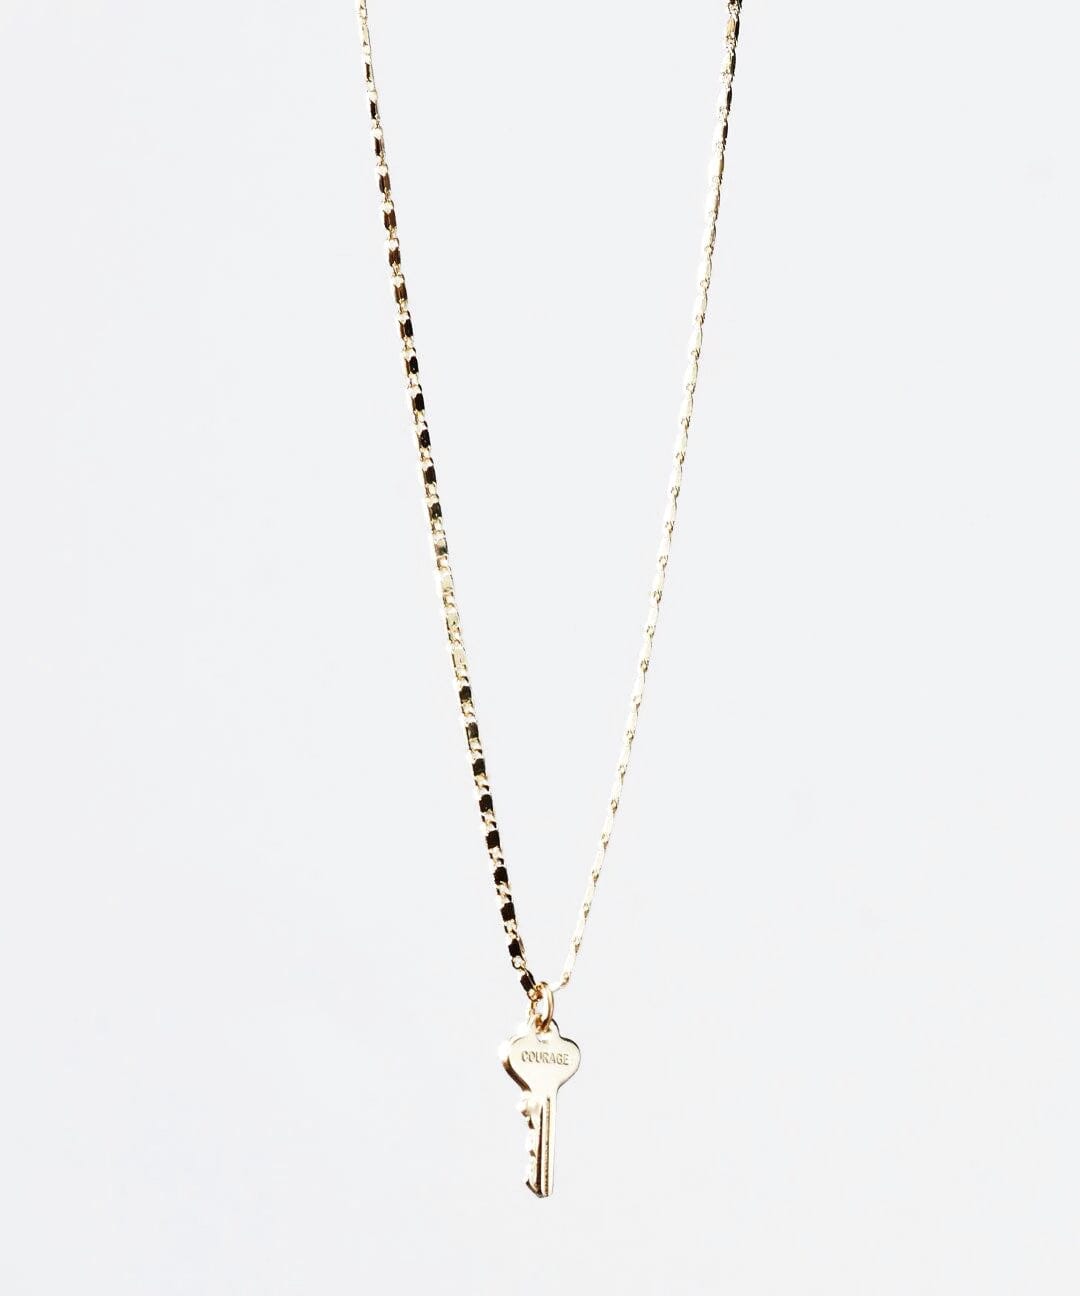 Petite Key Necklace Necklaces The Giving Keys COURAGE GOLD 